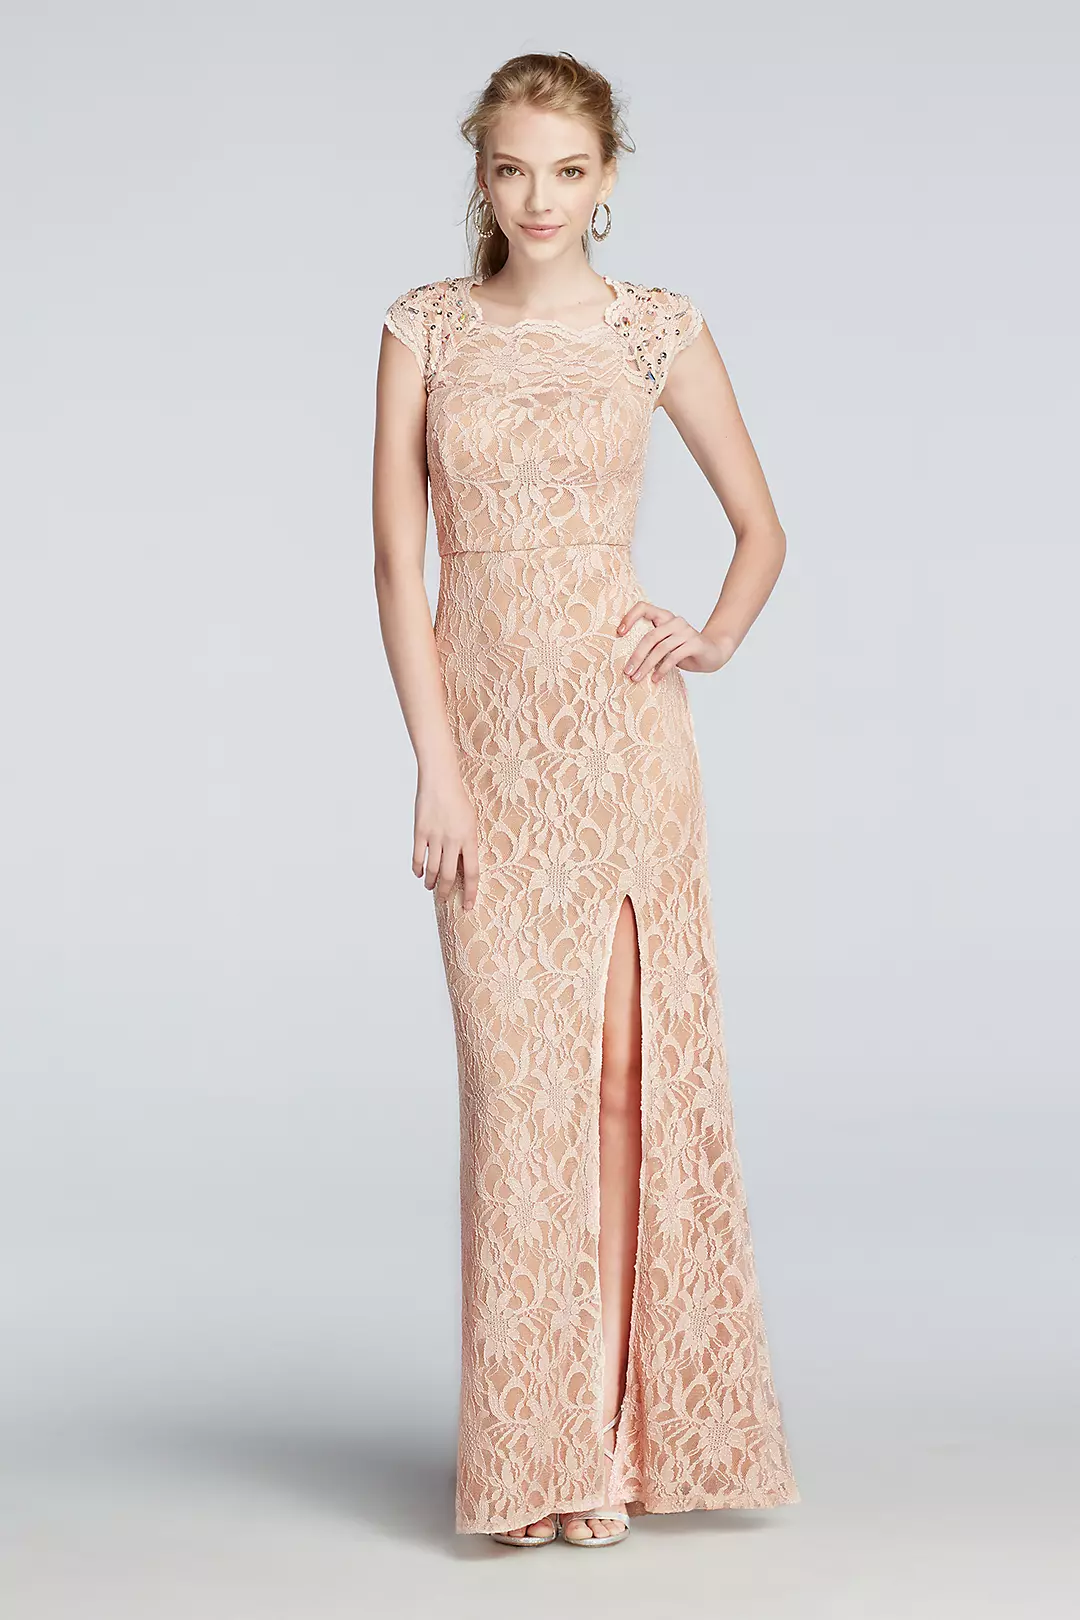 All Over Lace Prom Dress with Side Slit Skirt Image